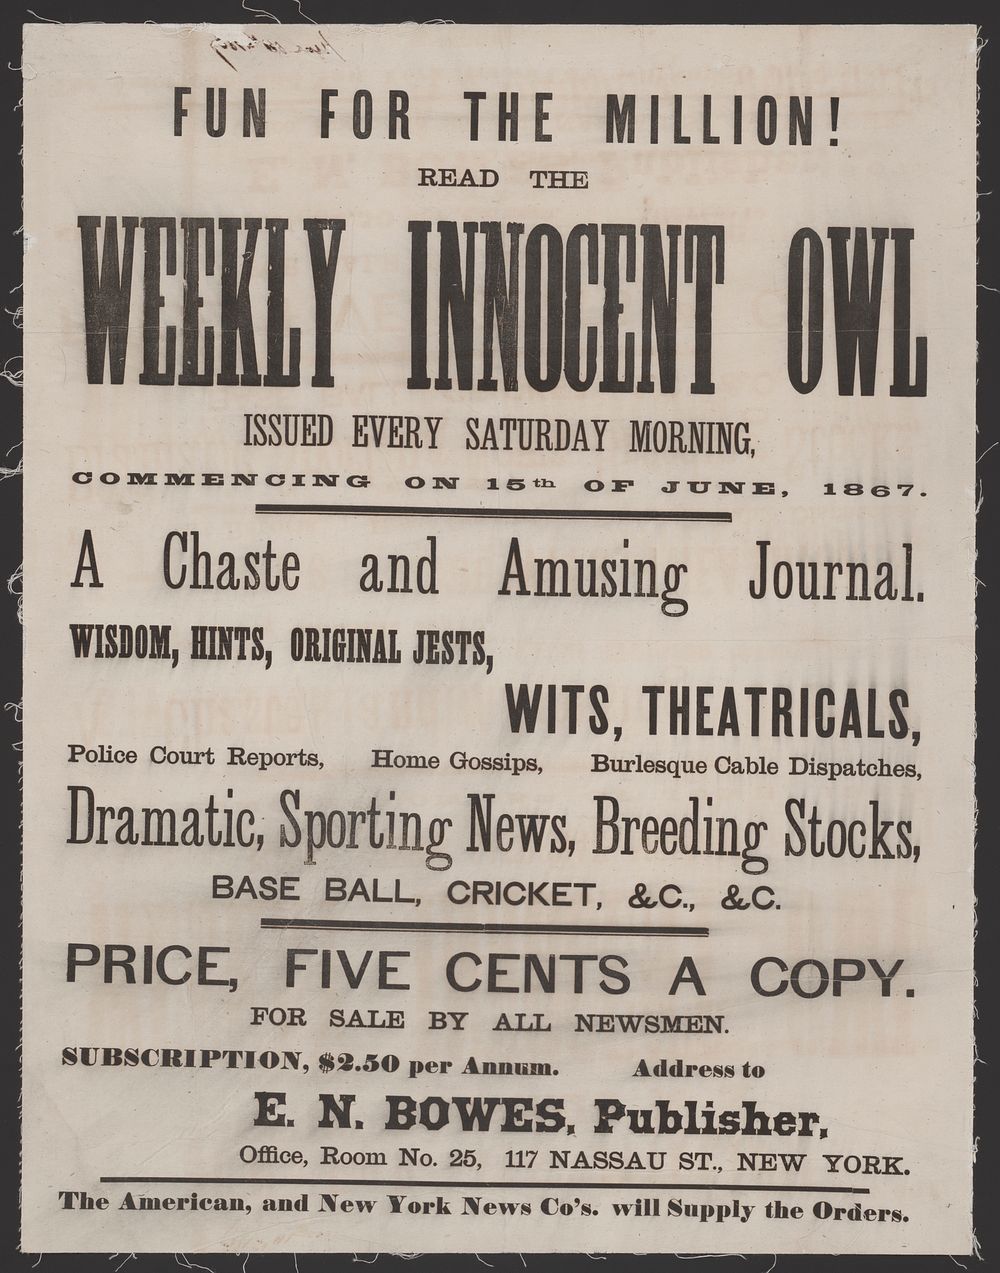 Fun for the million! Read the Weekly Innocent Owl issued every Saturday morning, commencing on 15th of June, 1867.